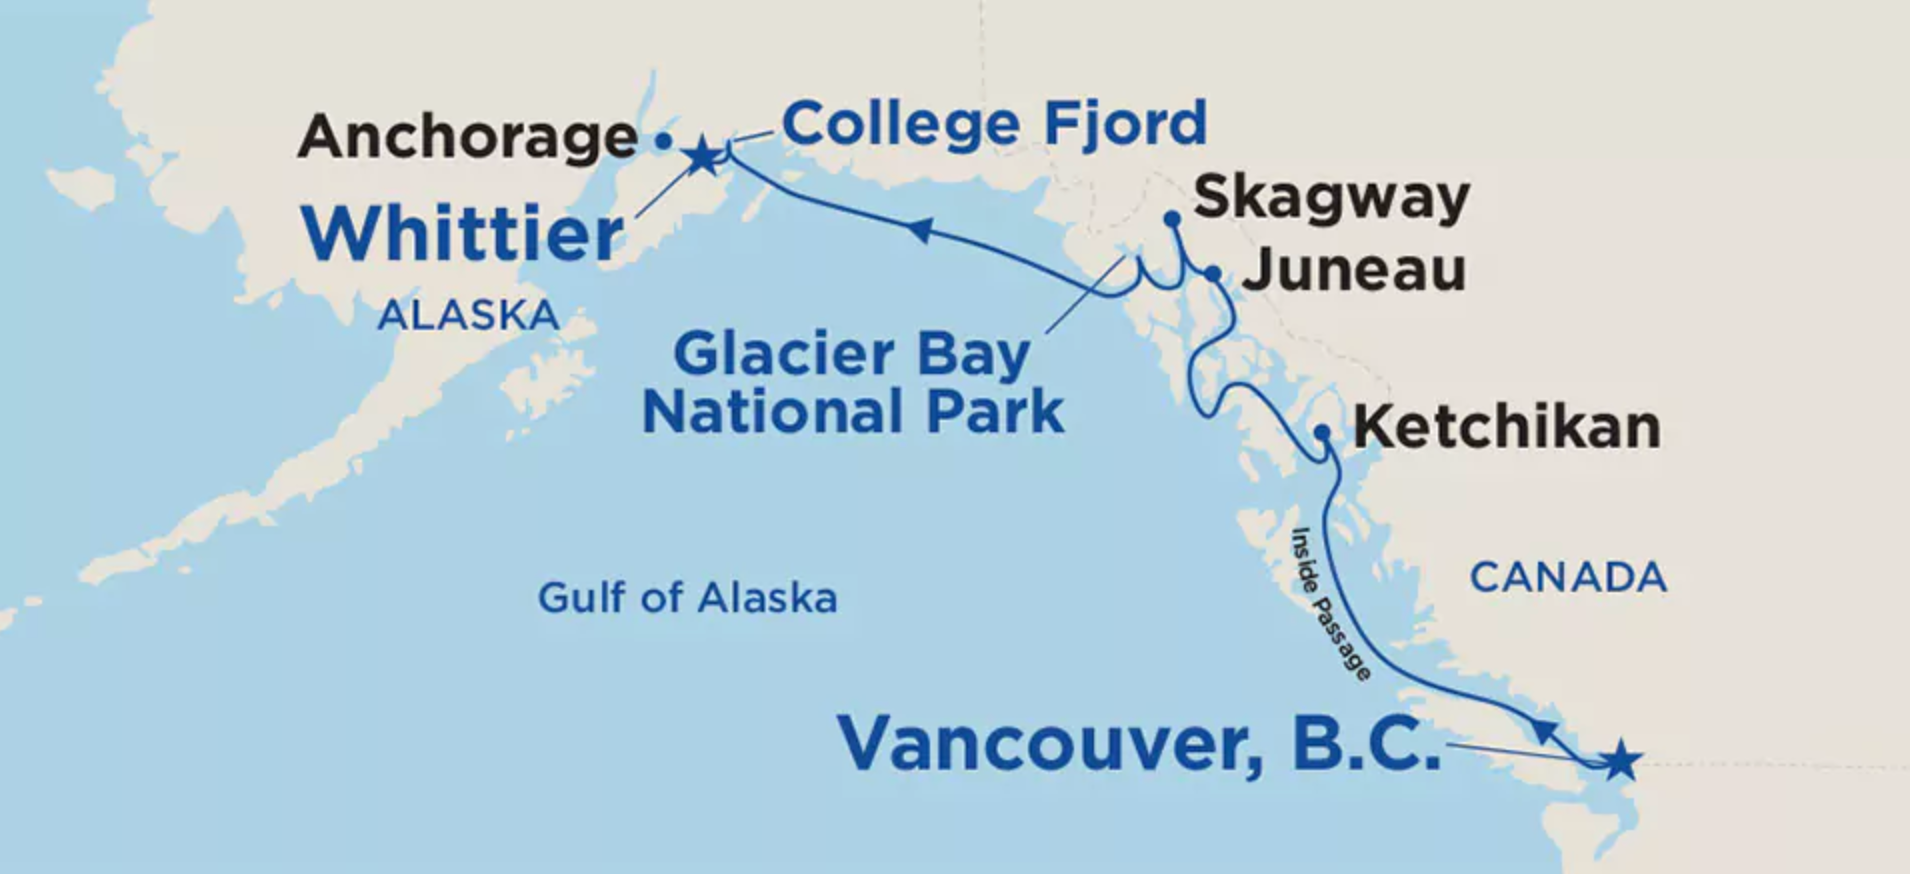 This is an example of a Princess cruise that visits the Inside Passage as well as the Gulf of Alaska, terminating or originating in Anchorage Whittier), Alaska. Photo courtesy of Princess Cruises )